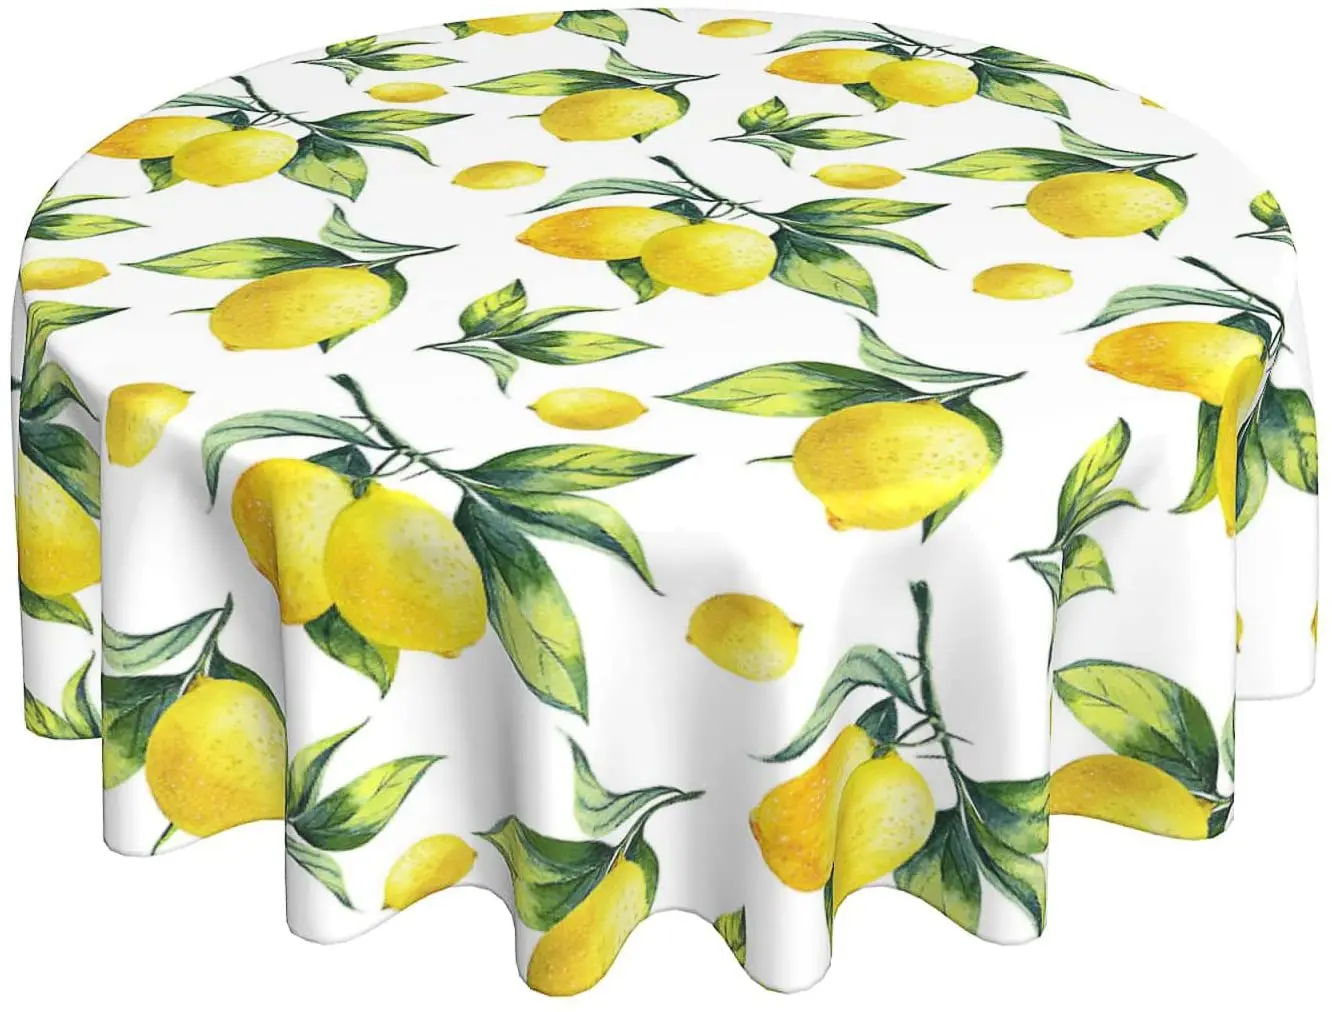 

Yellow Lemon Tablecloth Round 60 Inch Spring Summer Lemon Kitchen Decor Table Cloths for Holiday Dining Room Decorative Patio